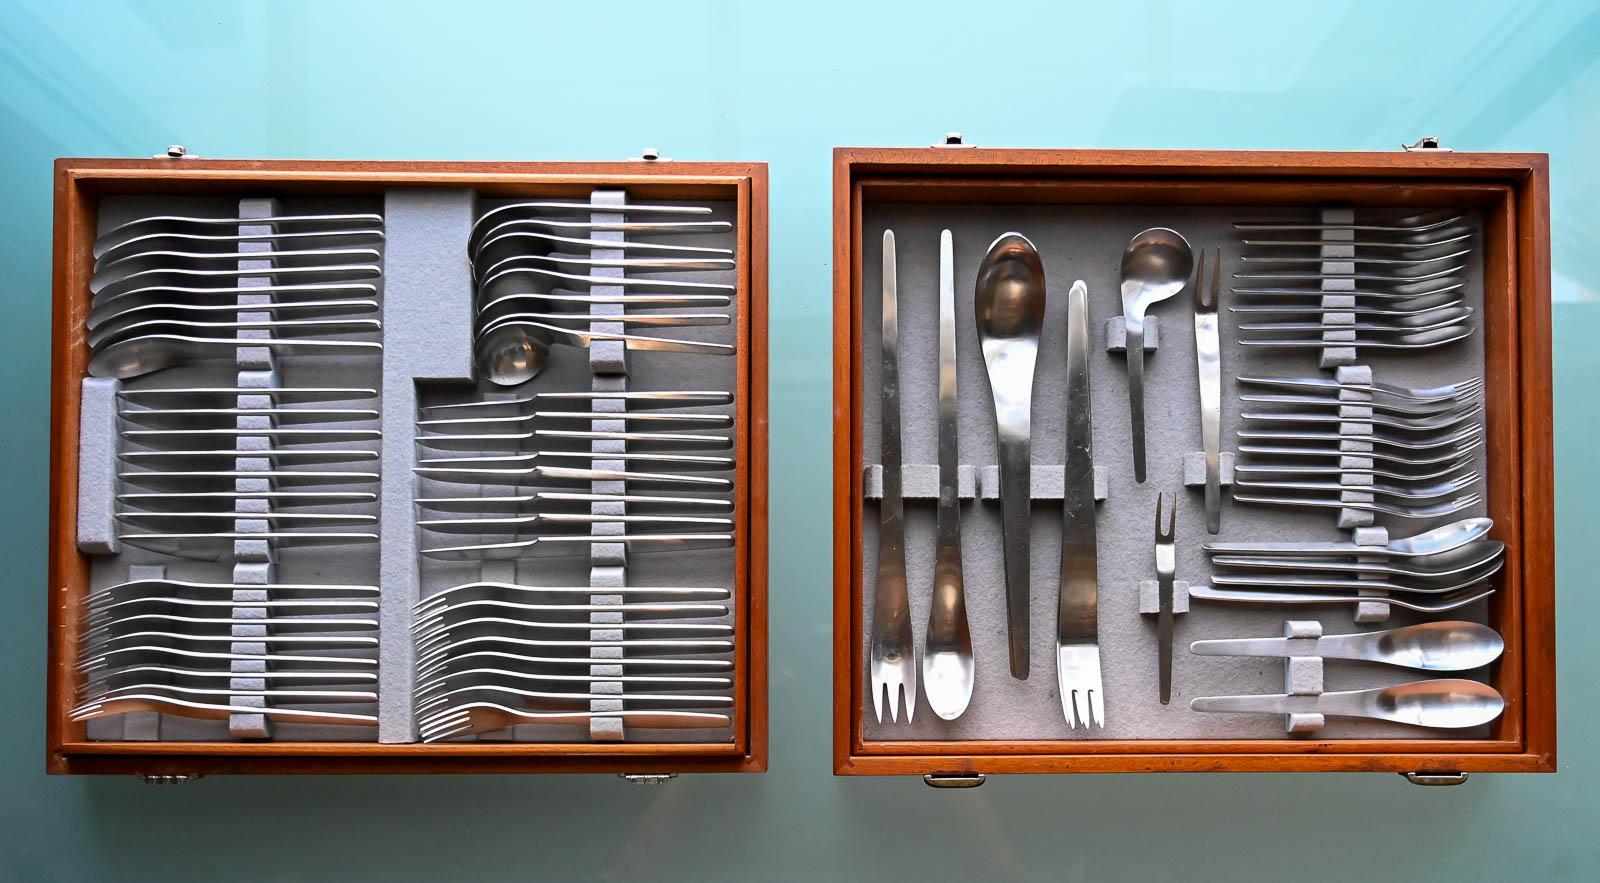 Early 103 piece set of Arne Jacobsen for Anton Michelsen Flatware, 1965 Stainless steel, with markings. Very good to excellent condition. 

Complete canteen service for eight also includes two large salad spoons, large salad fork, 4 extra